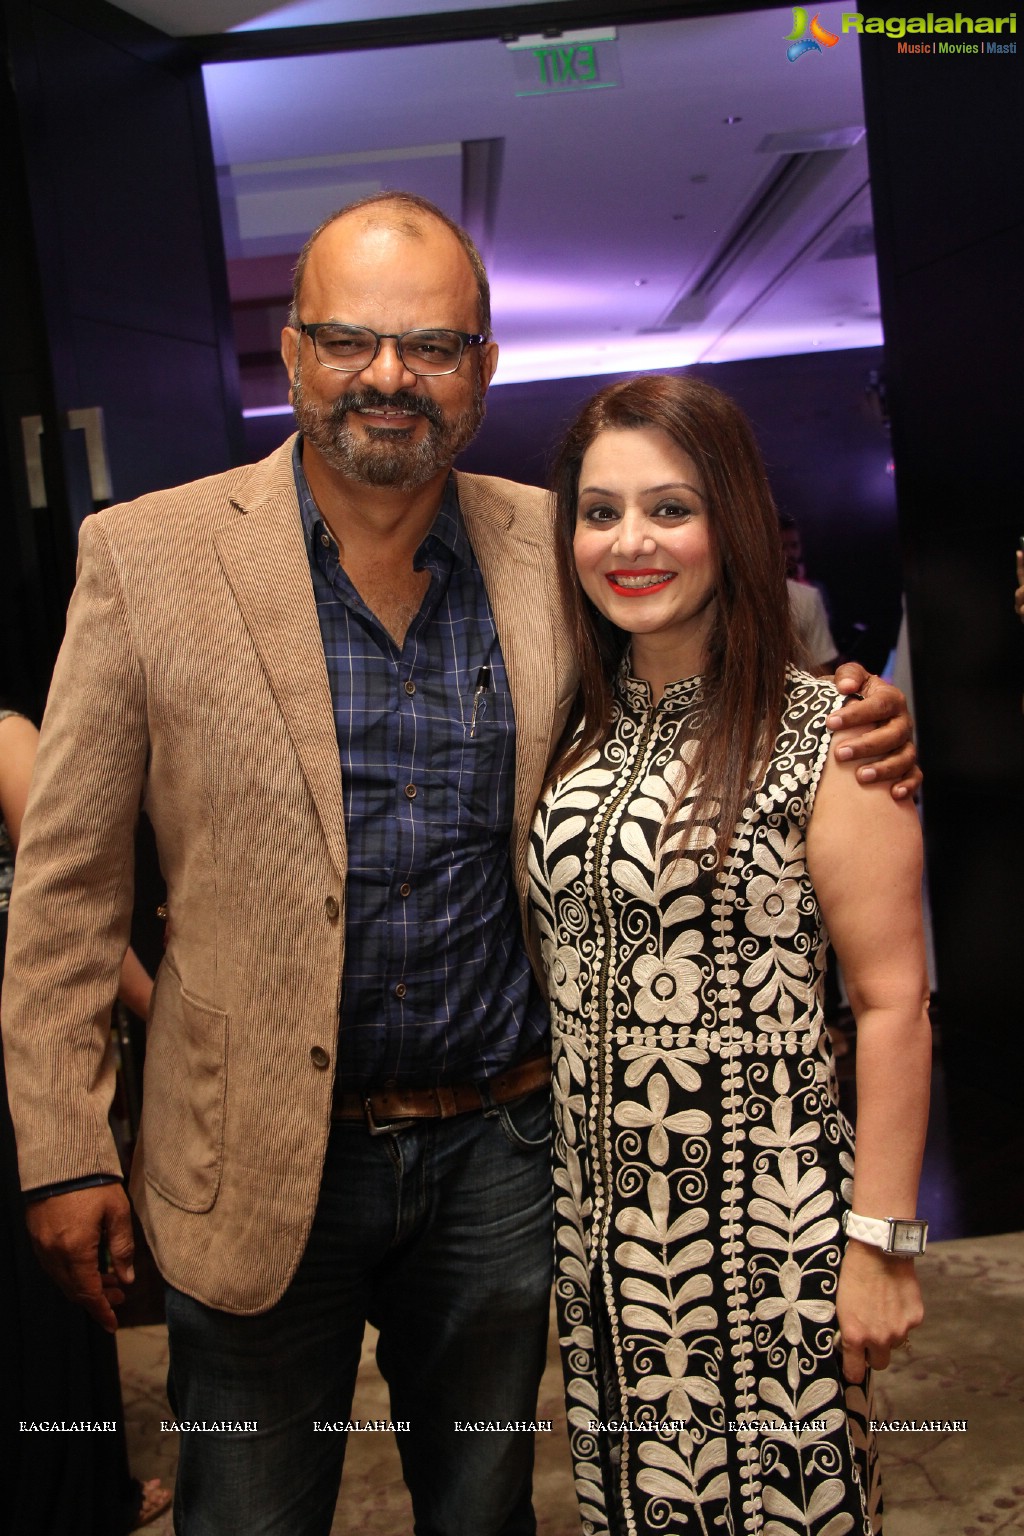 Friendship Day Bash by Ritz and Unveiling of Haute Affair by Akritti